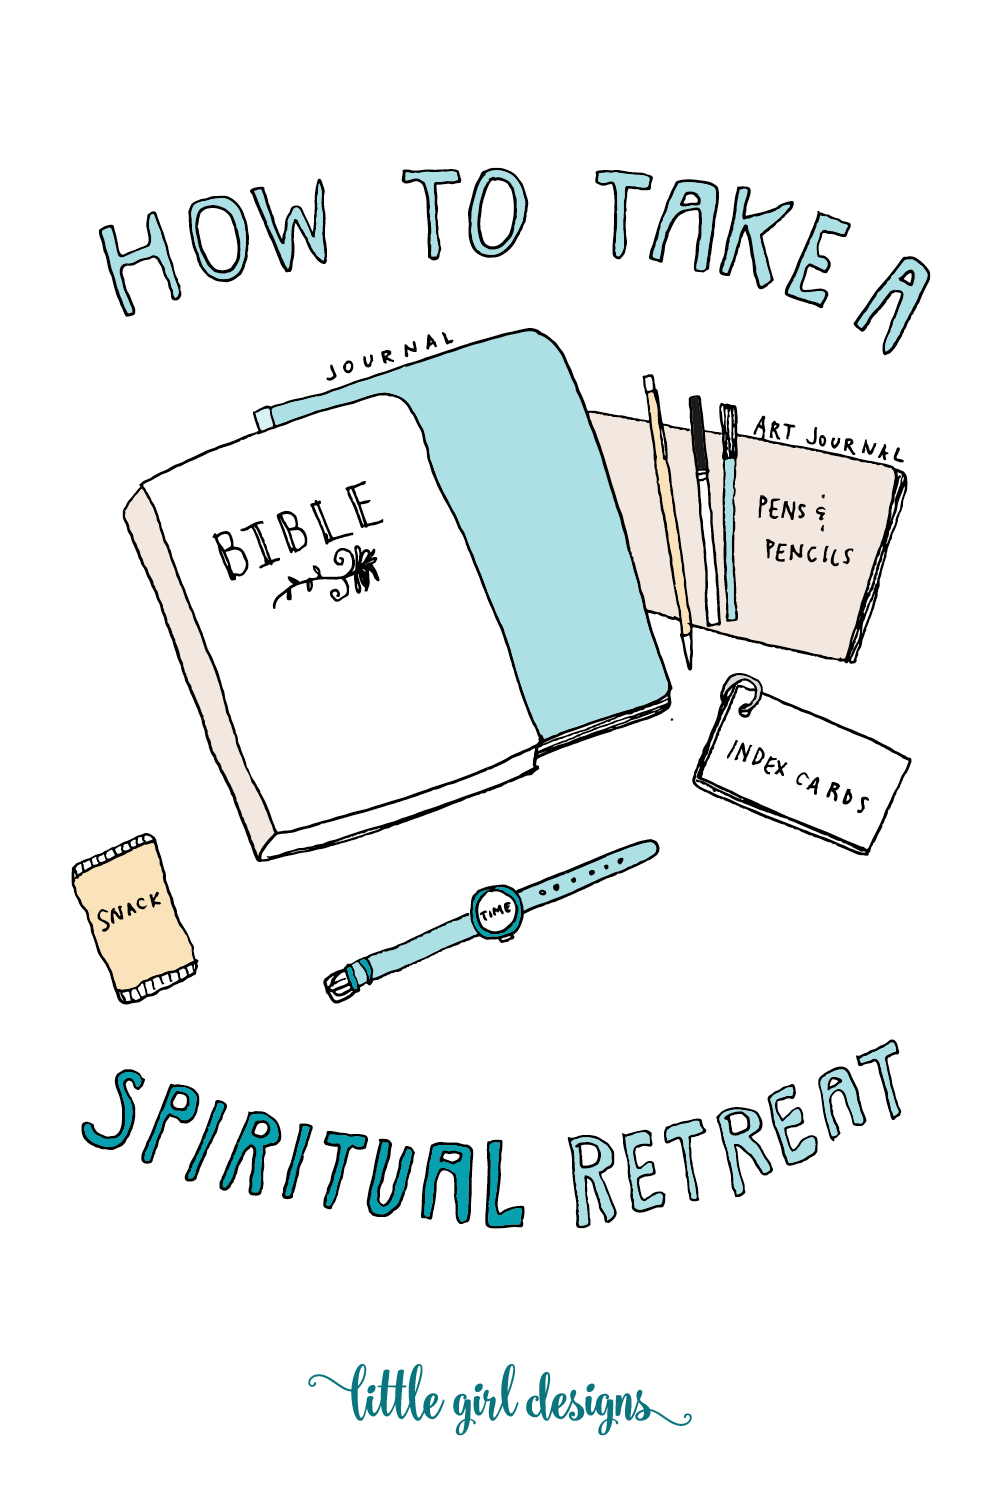 Want to take your own spiritual retreat? Here are some ideas to get you started. I've used these for years and have found them to be very helpful.